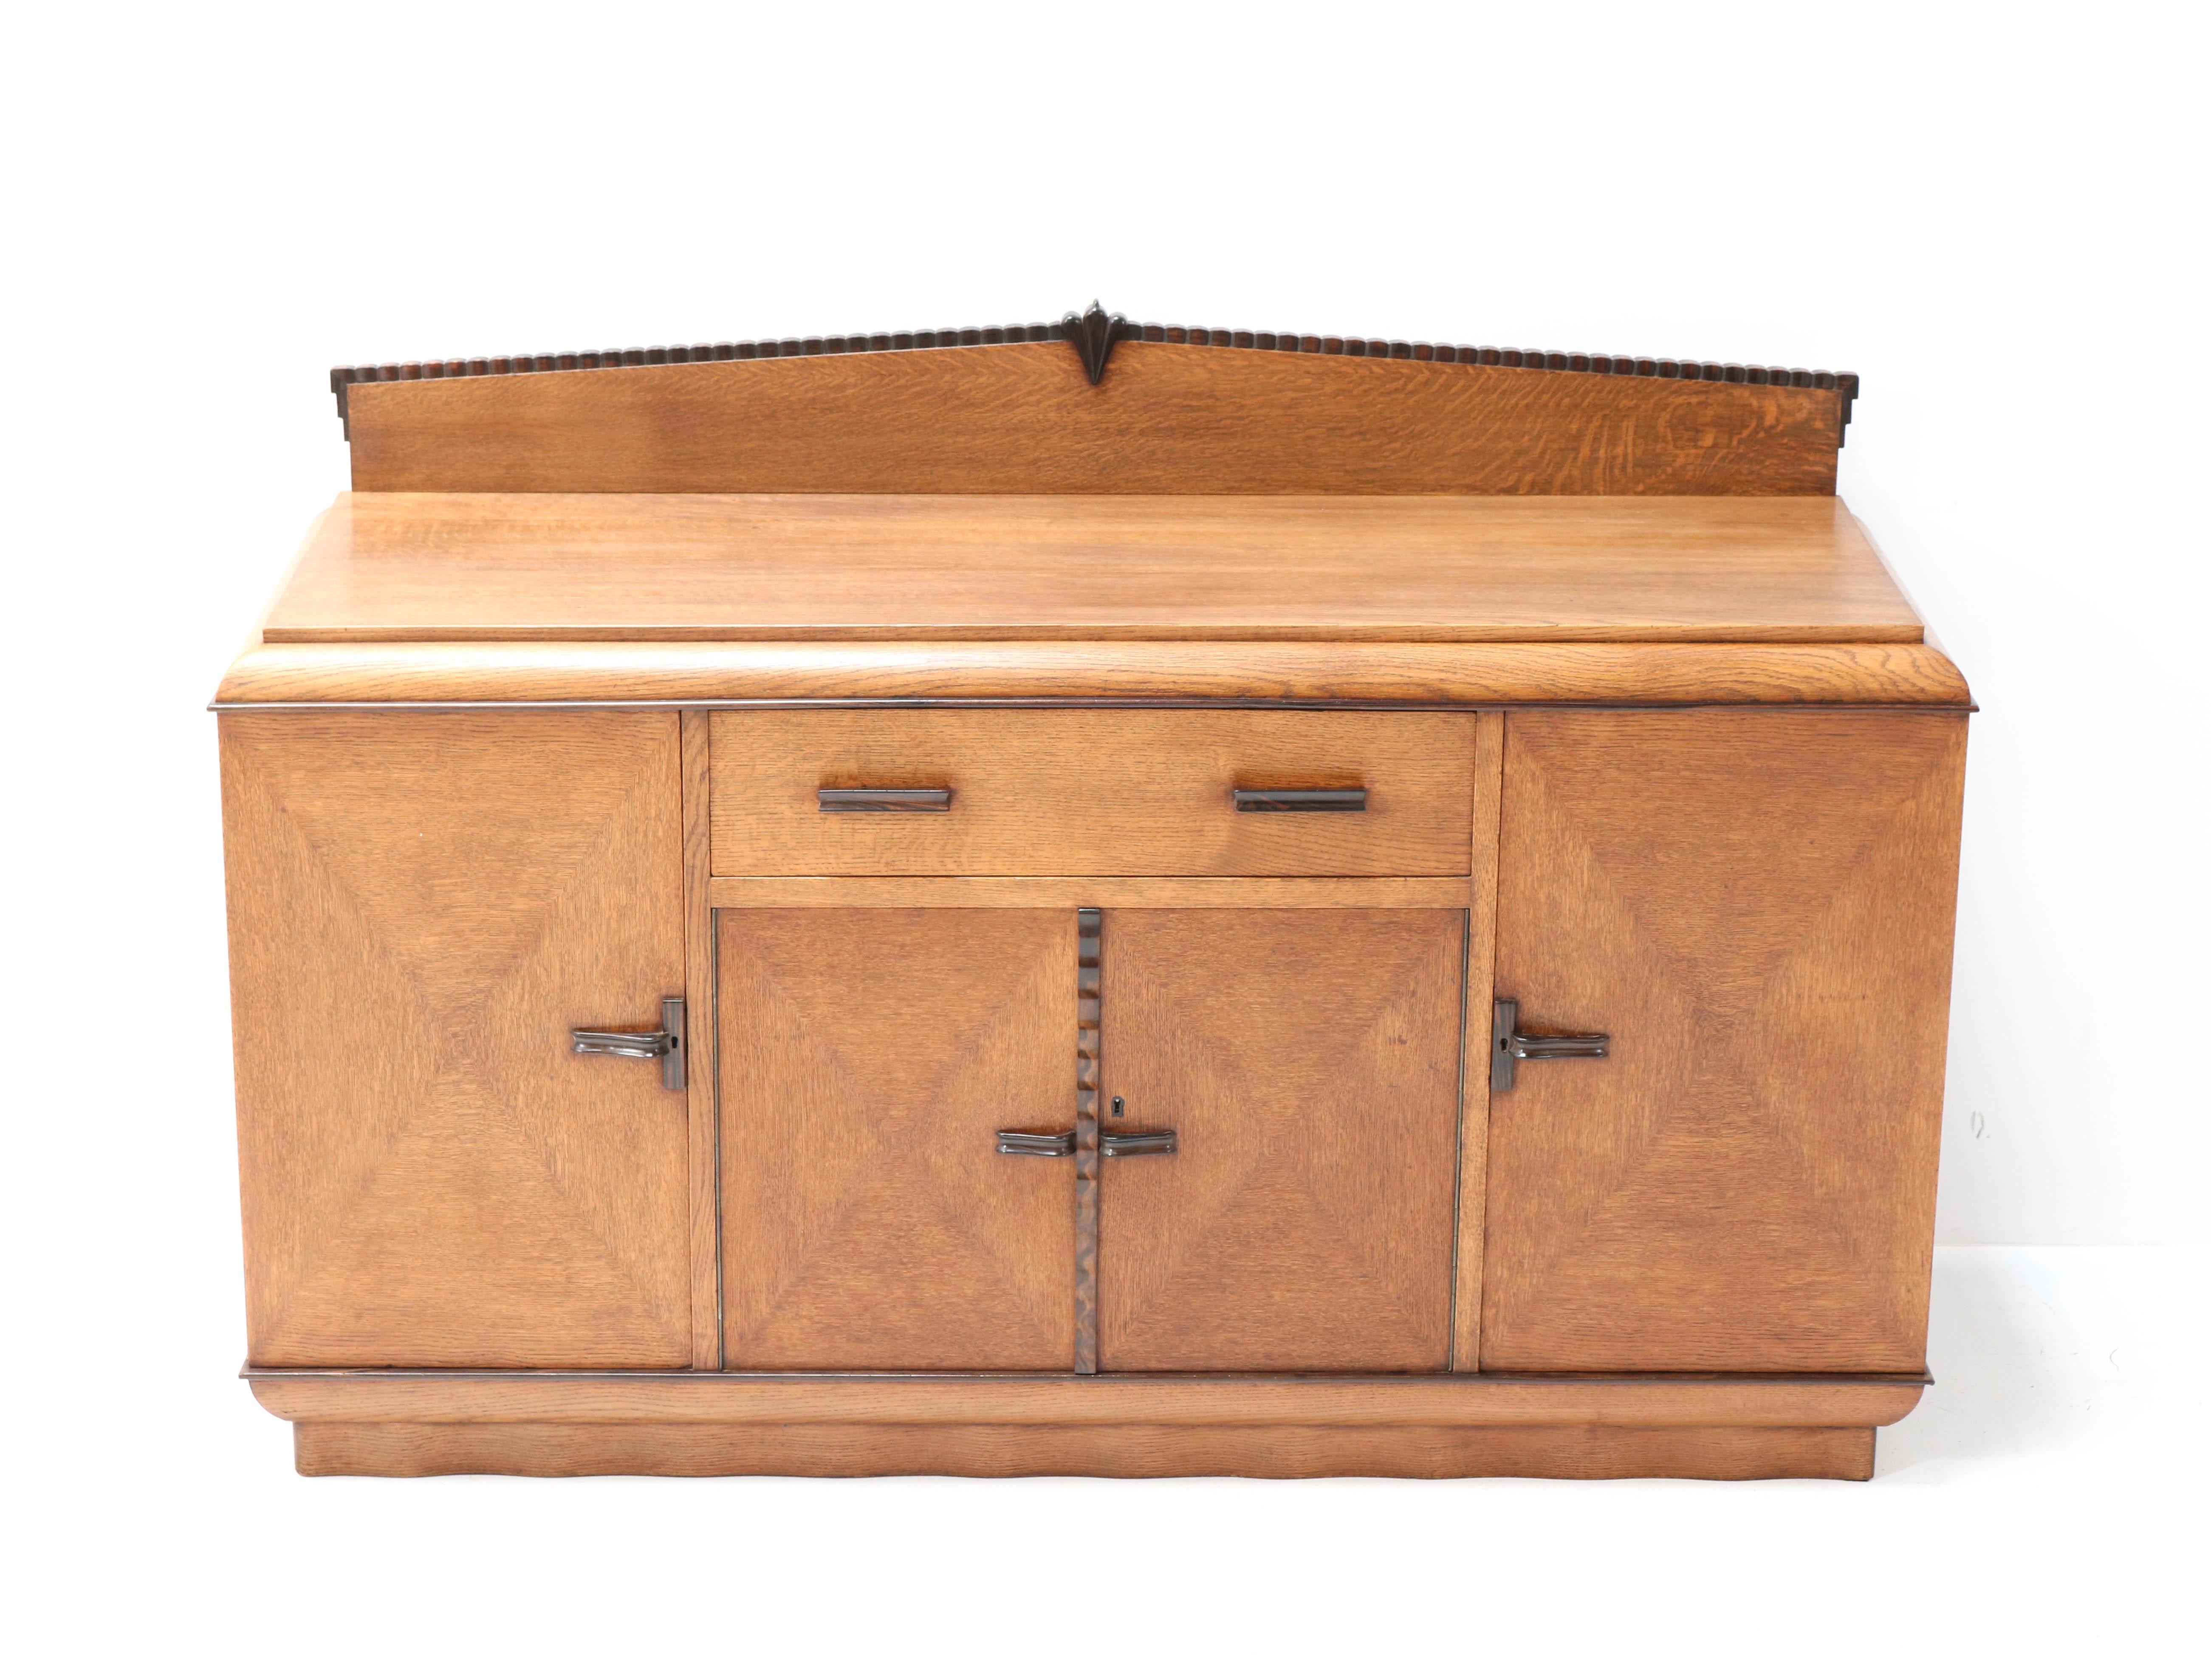 Stunning and rare Art Deco Amsterdam School credenza or sideboard.
Design by Fa. Drilling Amsterdam.
Striking Dutch design from the 1920s.
Solid oak with original solid macassar ebony handles and lining.
In very good condition with a beautiful